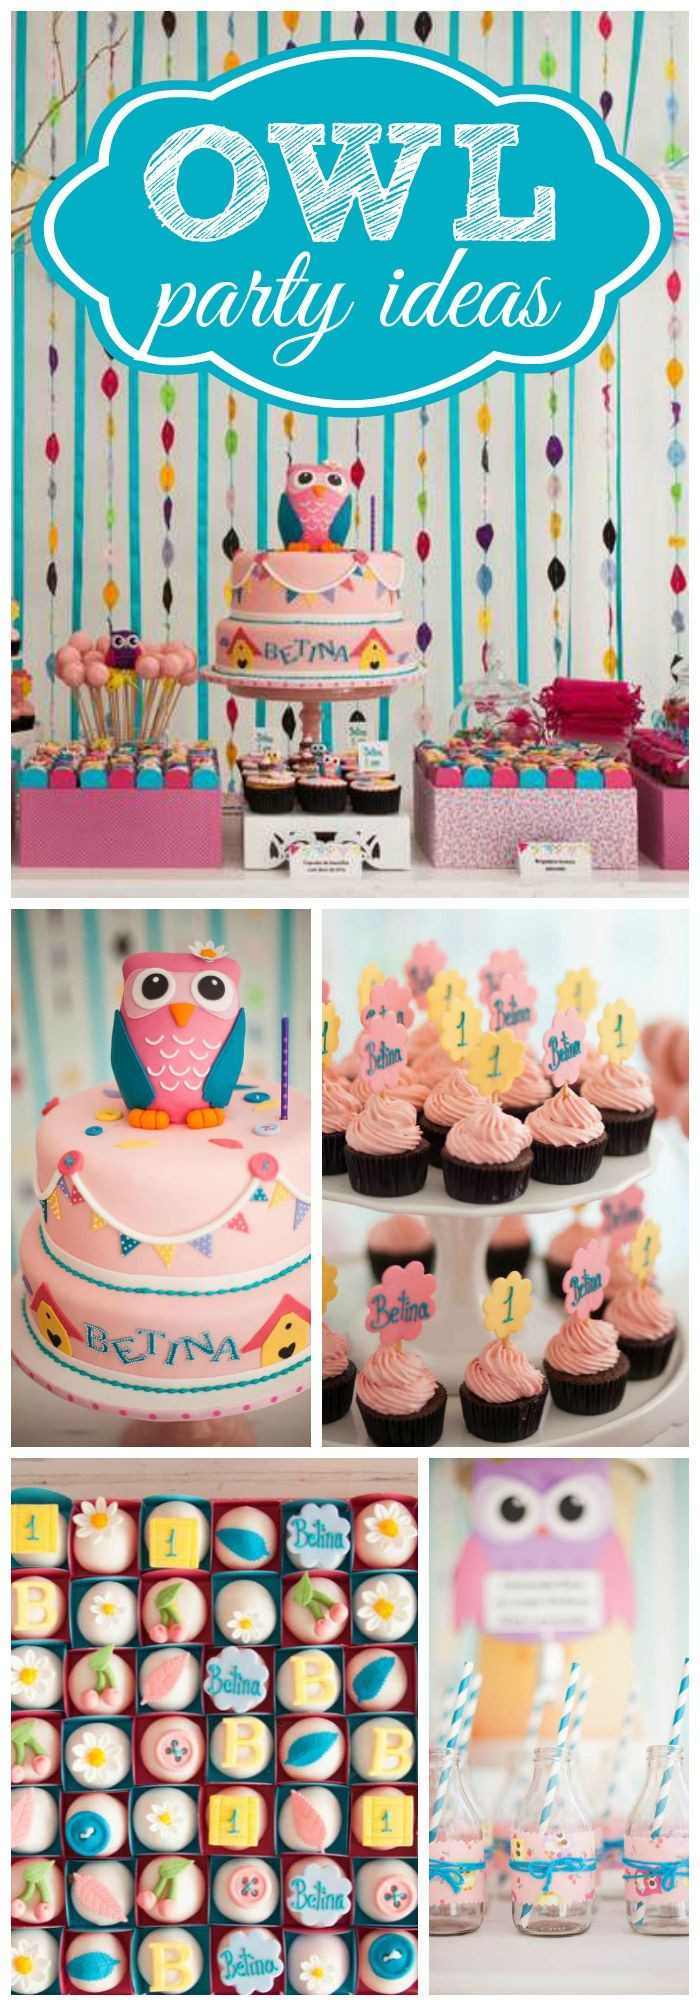 Owl First Birthday Decorations
 17 Best ideas about Owl Birthday Parties on Pinterest